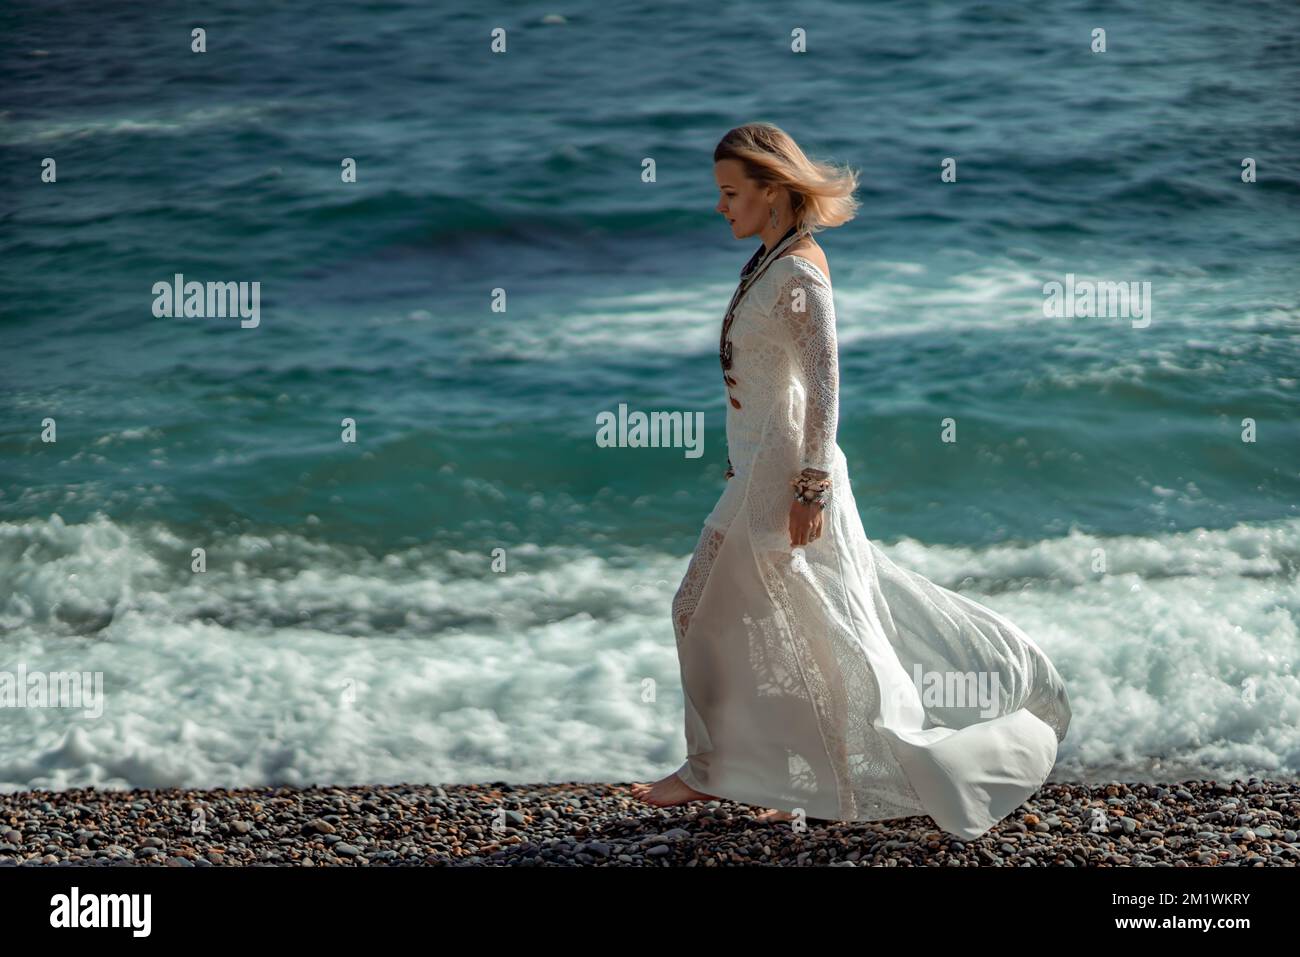 Middle aged woman looks good with blond hair, boho style in white long dress on the beach decorations on her neck and arms. Stock Photo